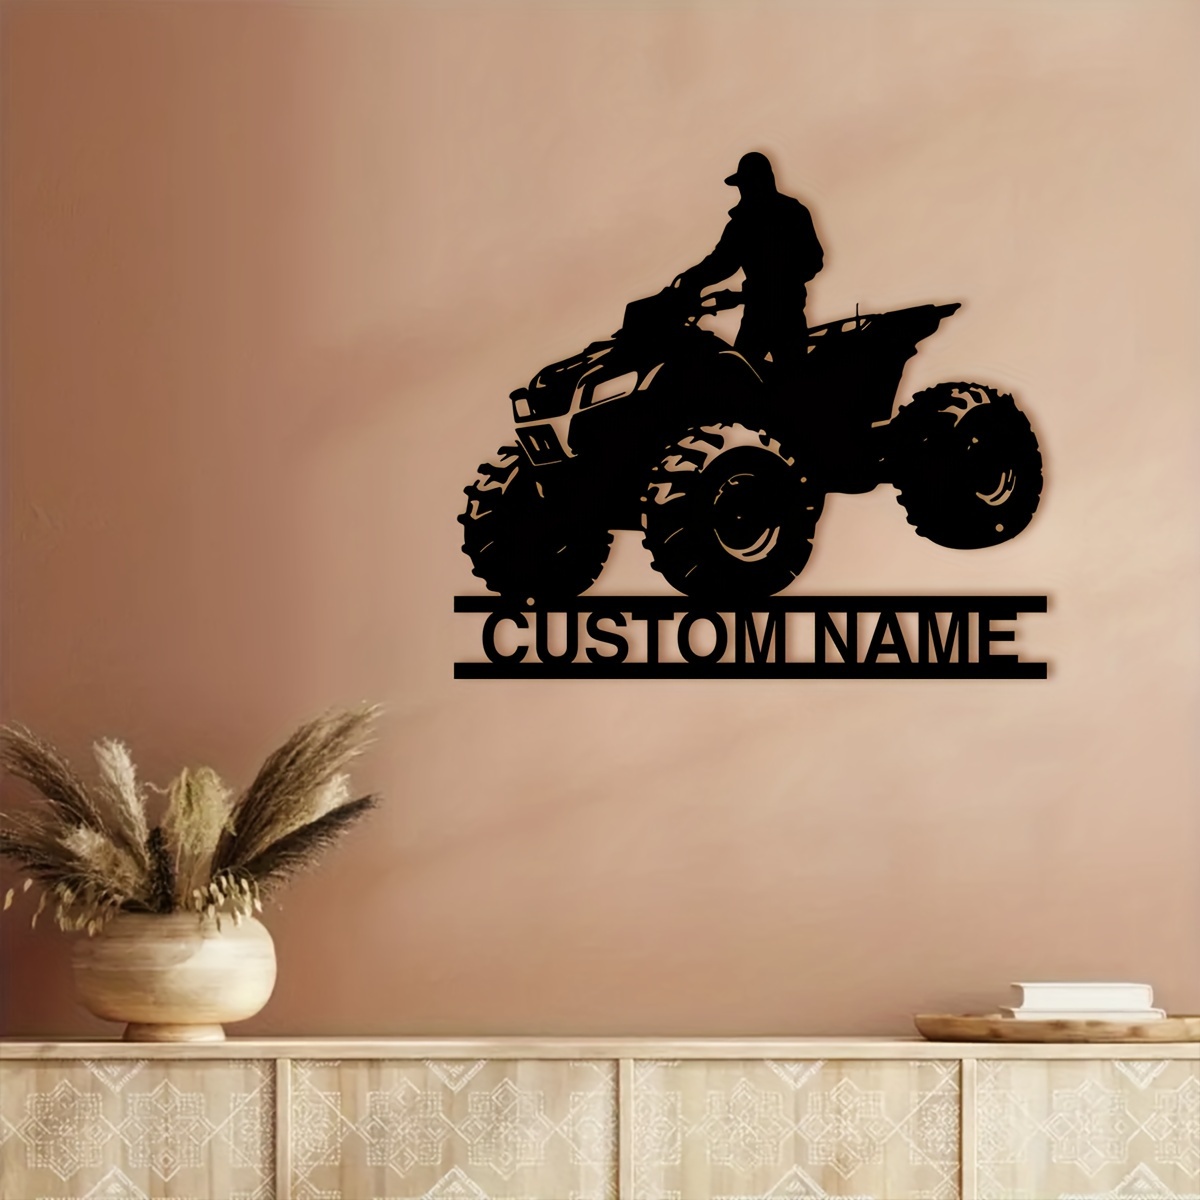 

1pc Custom Adventure Buggy Wall Art, Personalized Names Adventure Buggy Signs, Farmhouse Wall Decor, Metal Adventure Buggy Art, Custom Names Wall Decor For Porches, Patio, Gifts